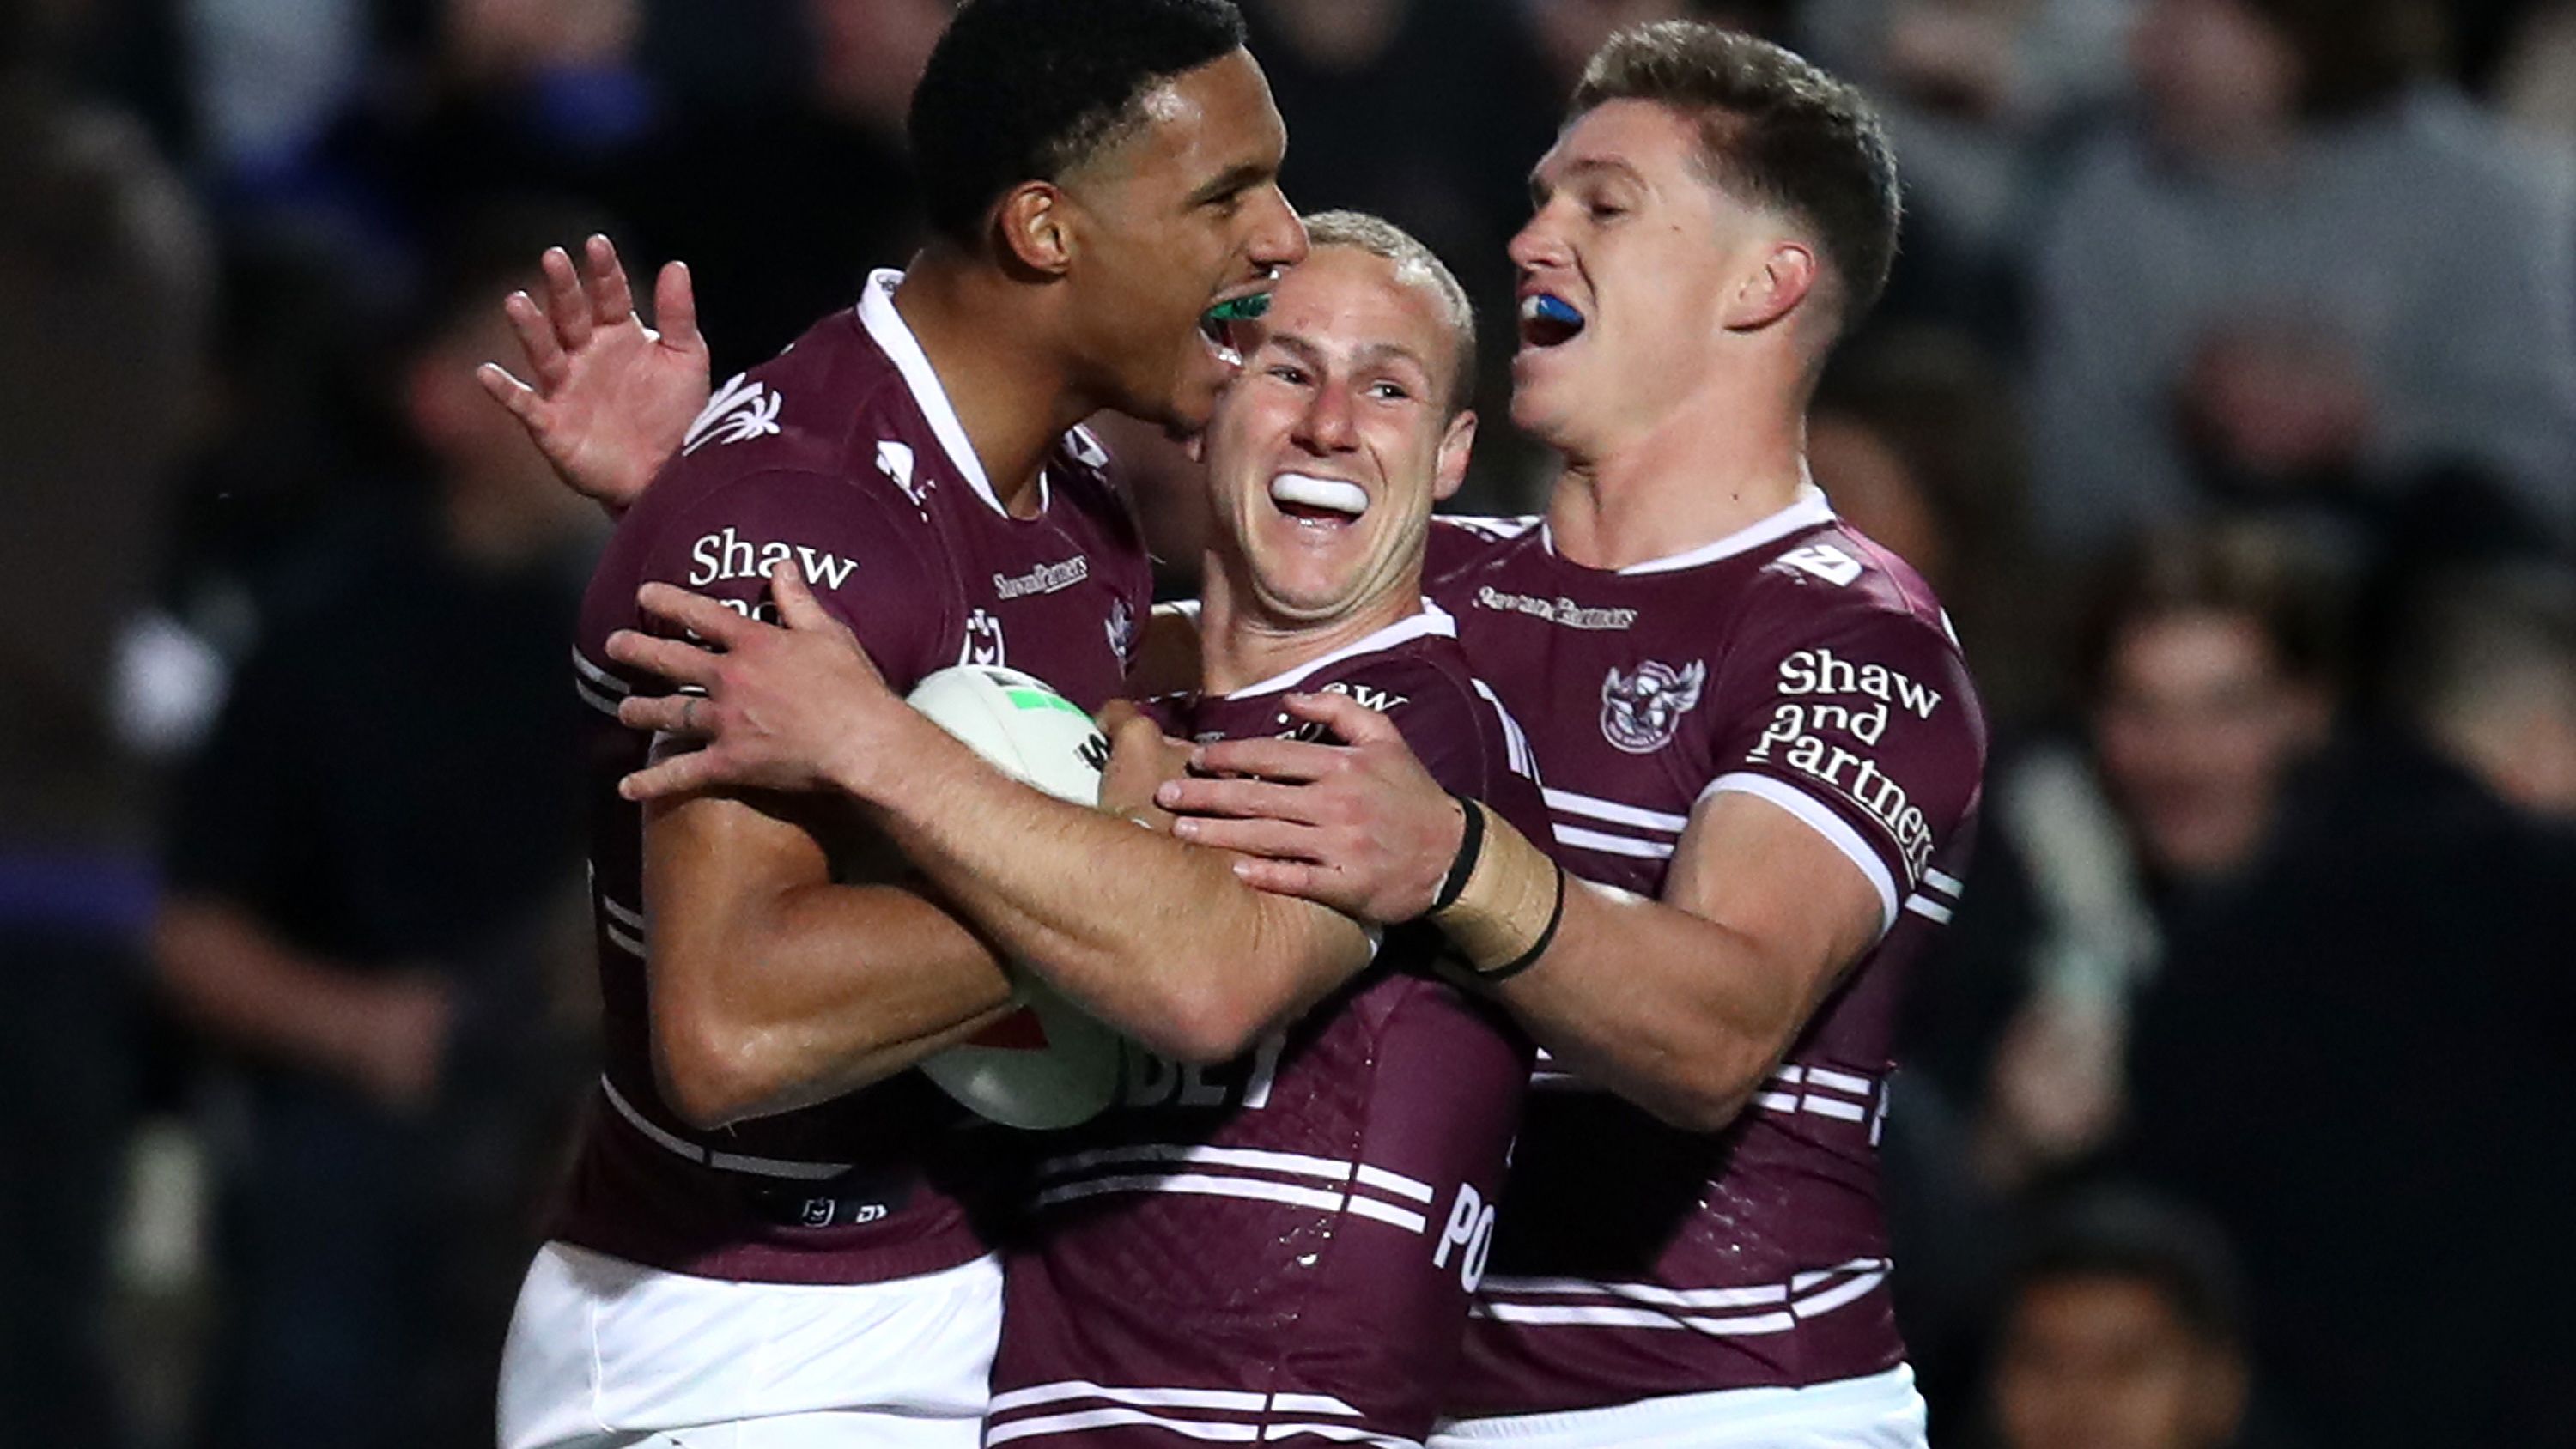 NRL tips round 24: Brad Fittler explains tactic that can land Sea Eagles massive upset win